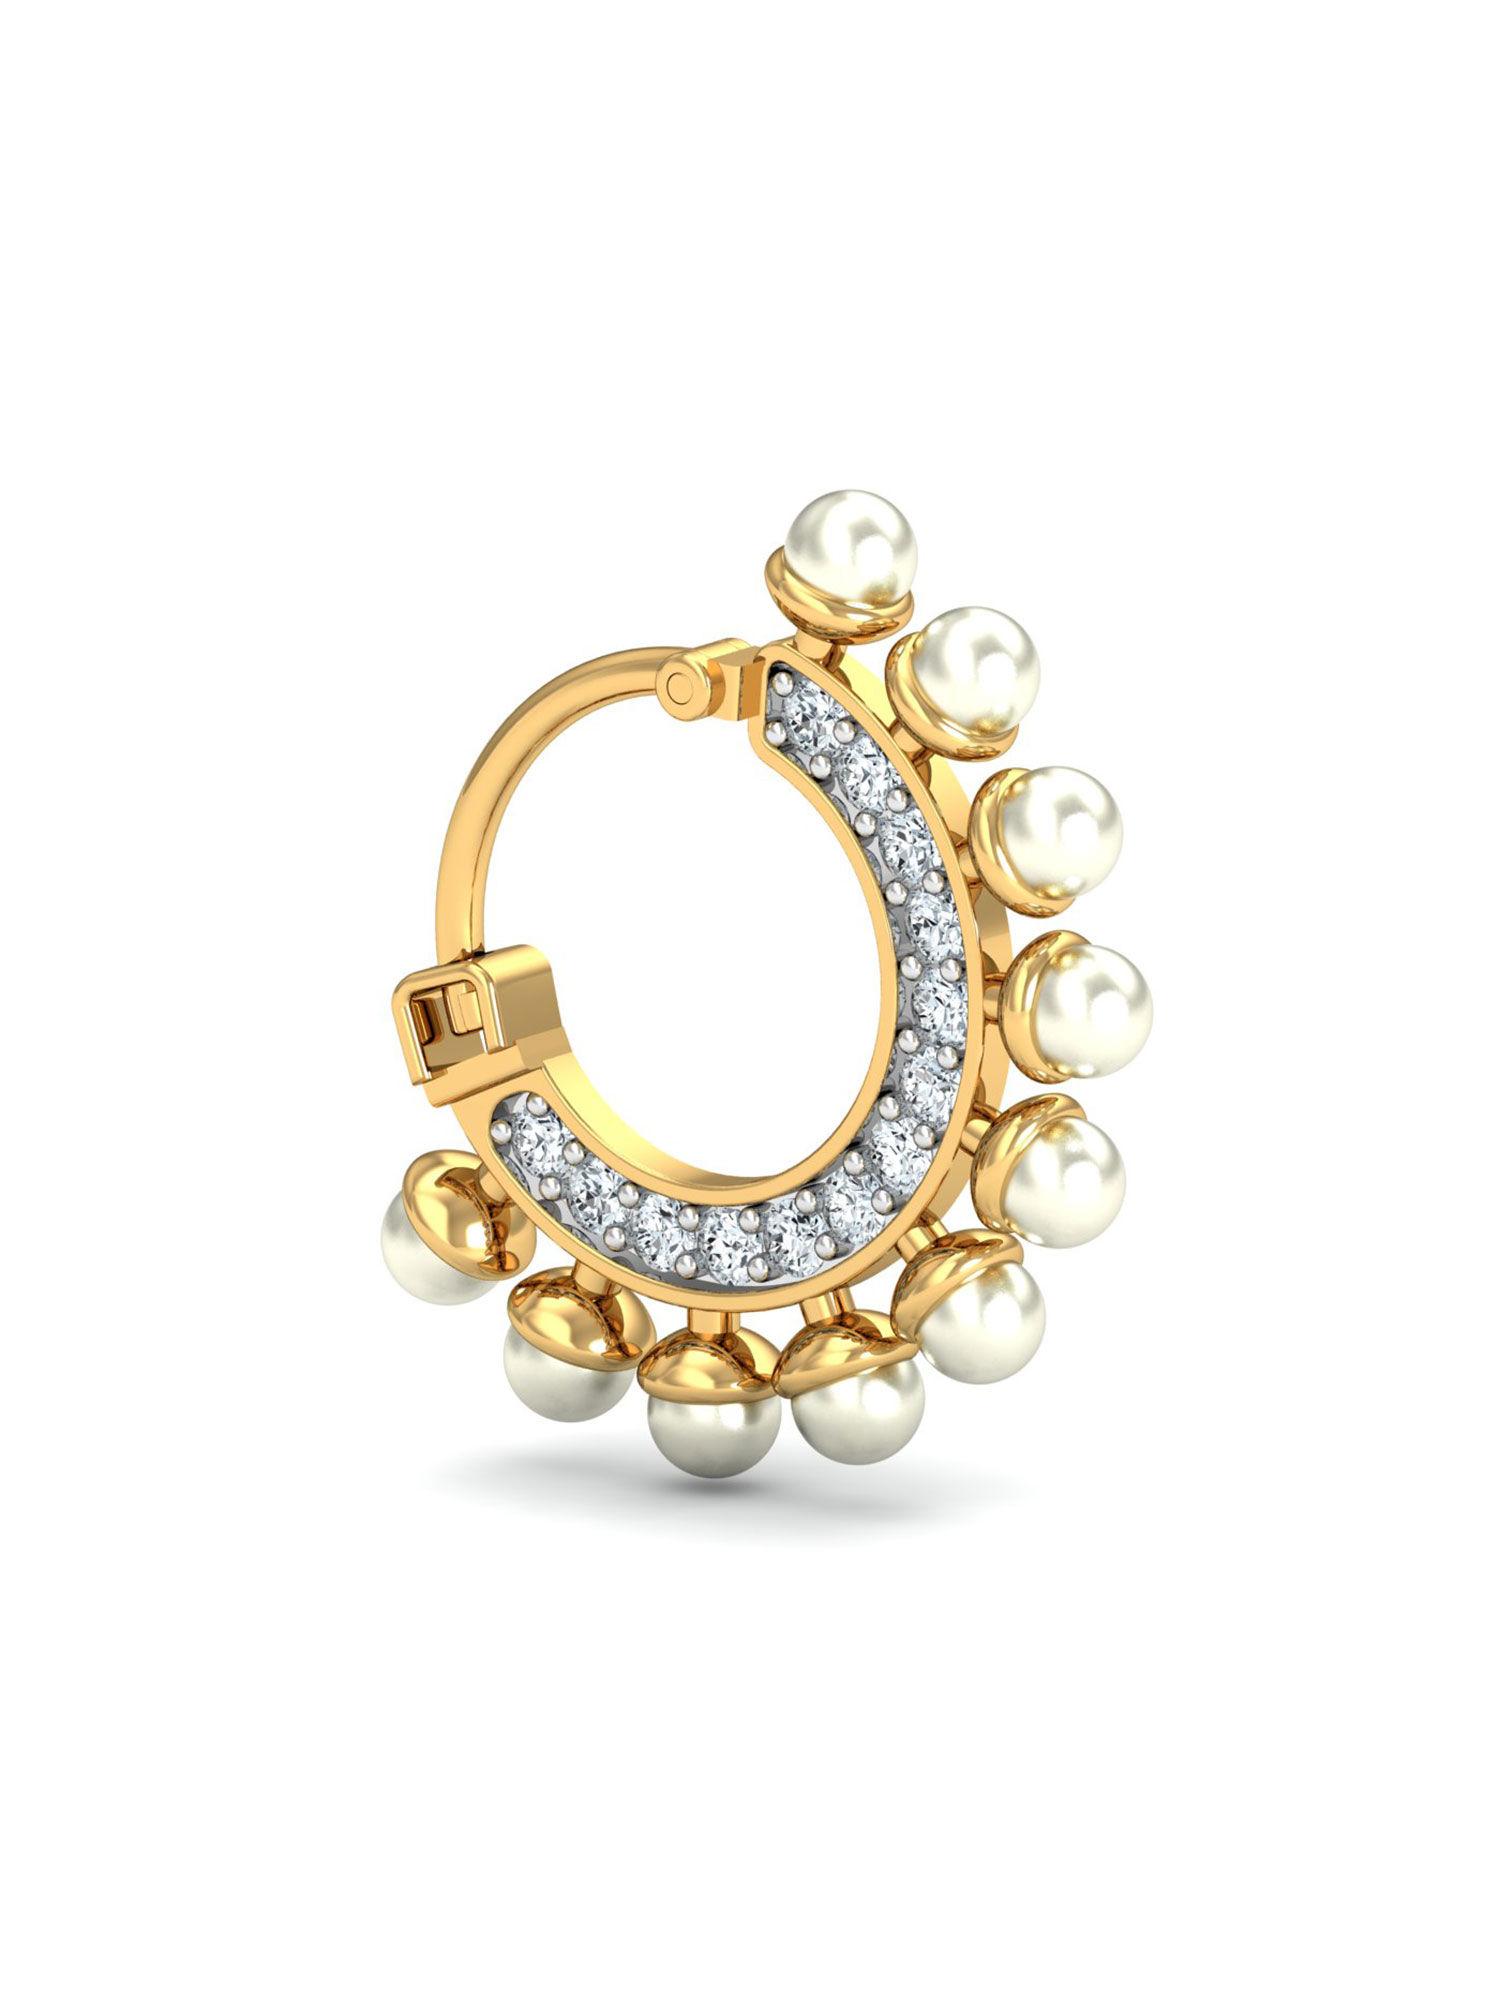 18k dream pearl and diamond nose ring for women and girls